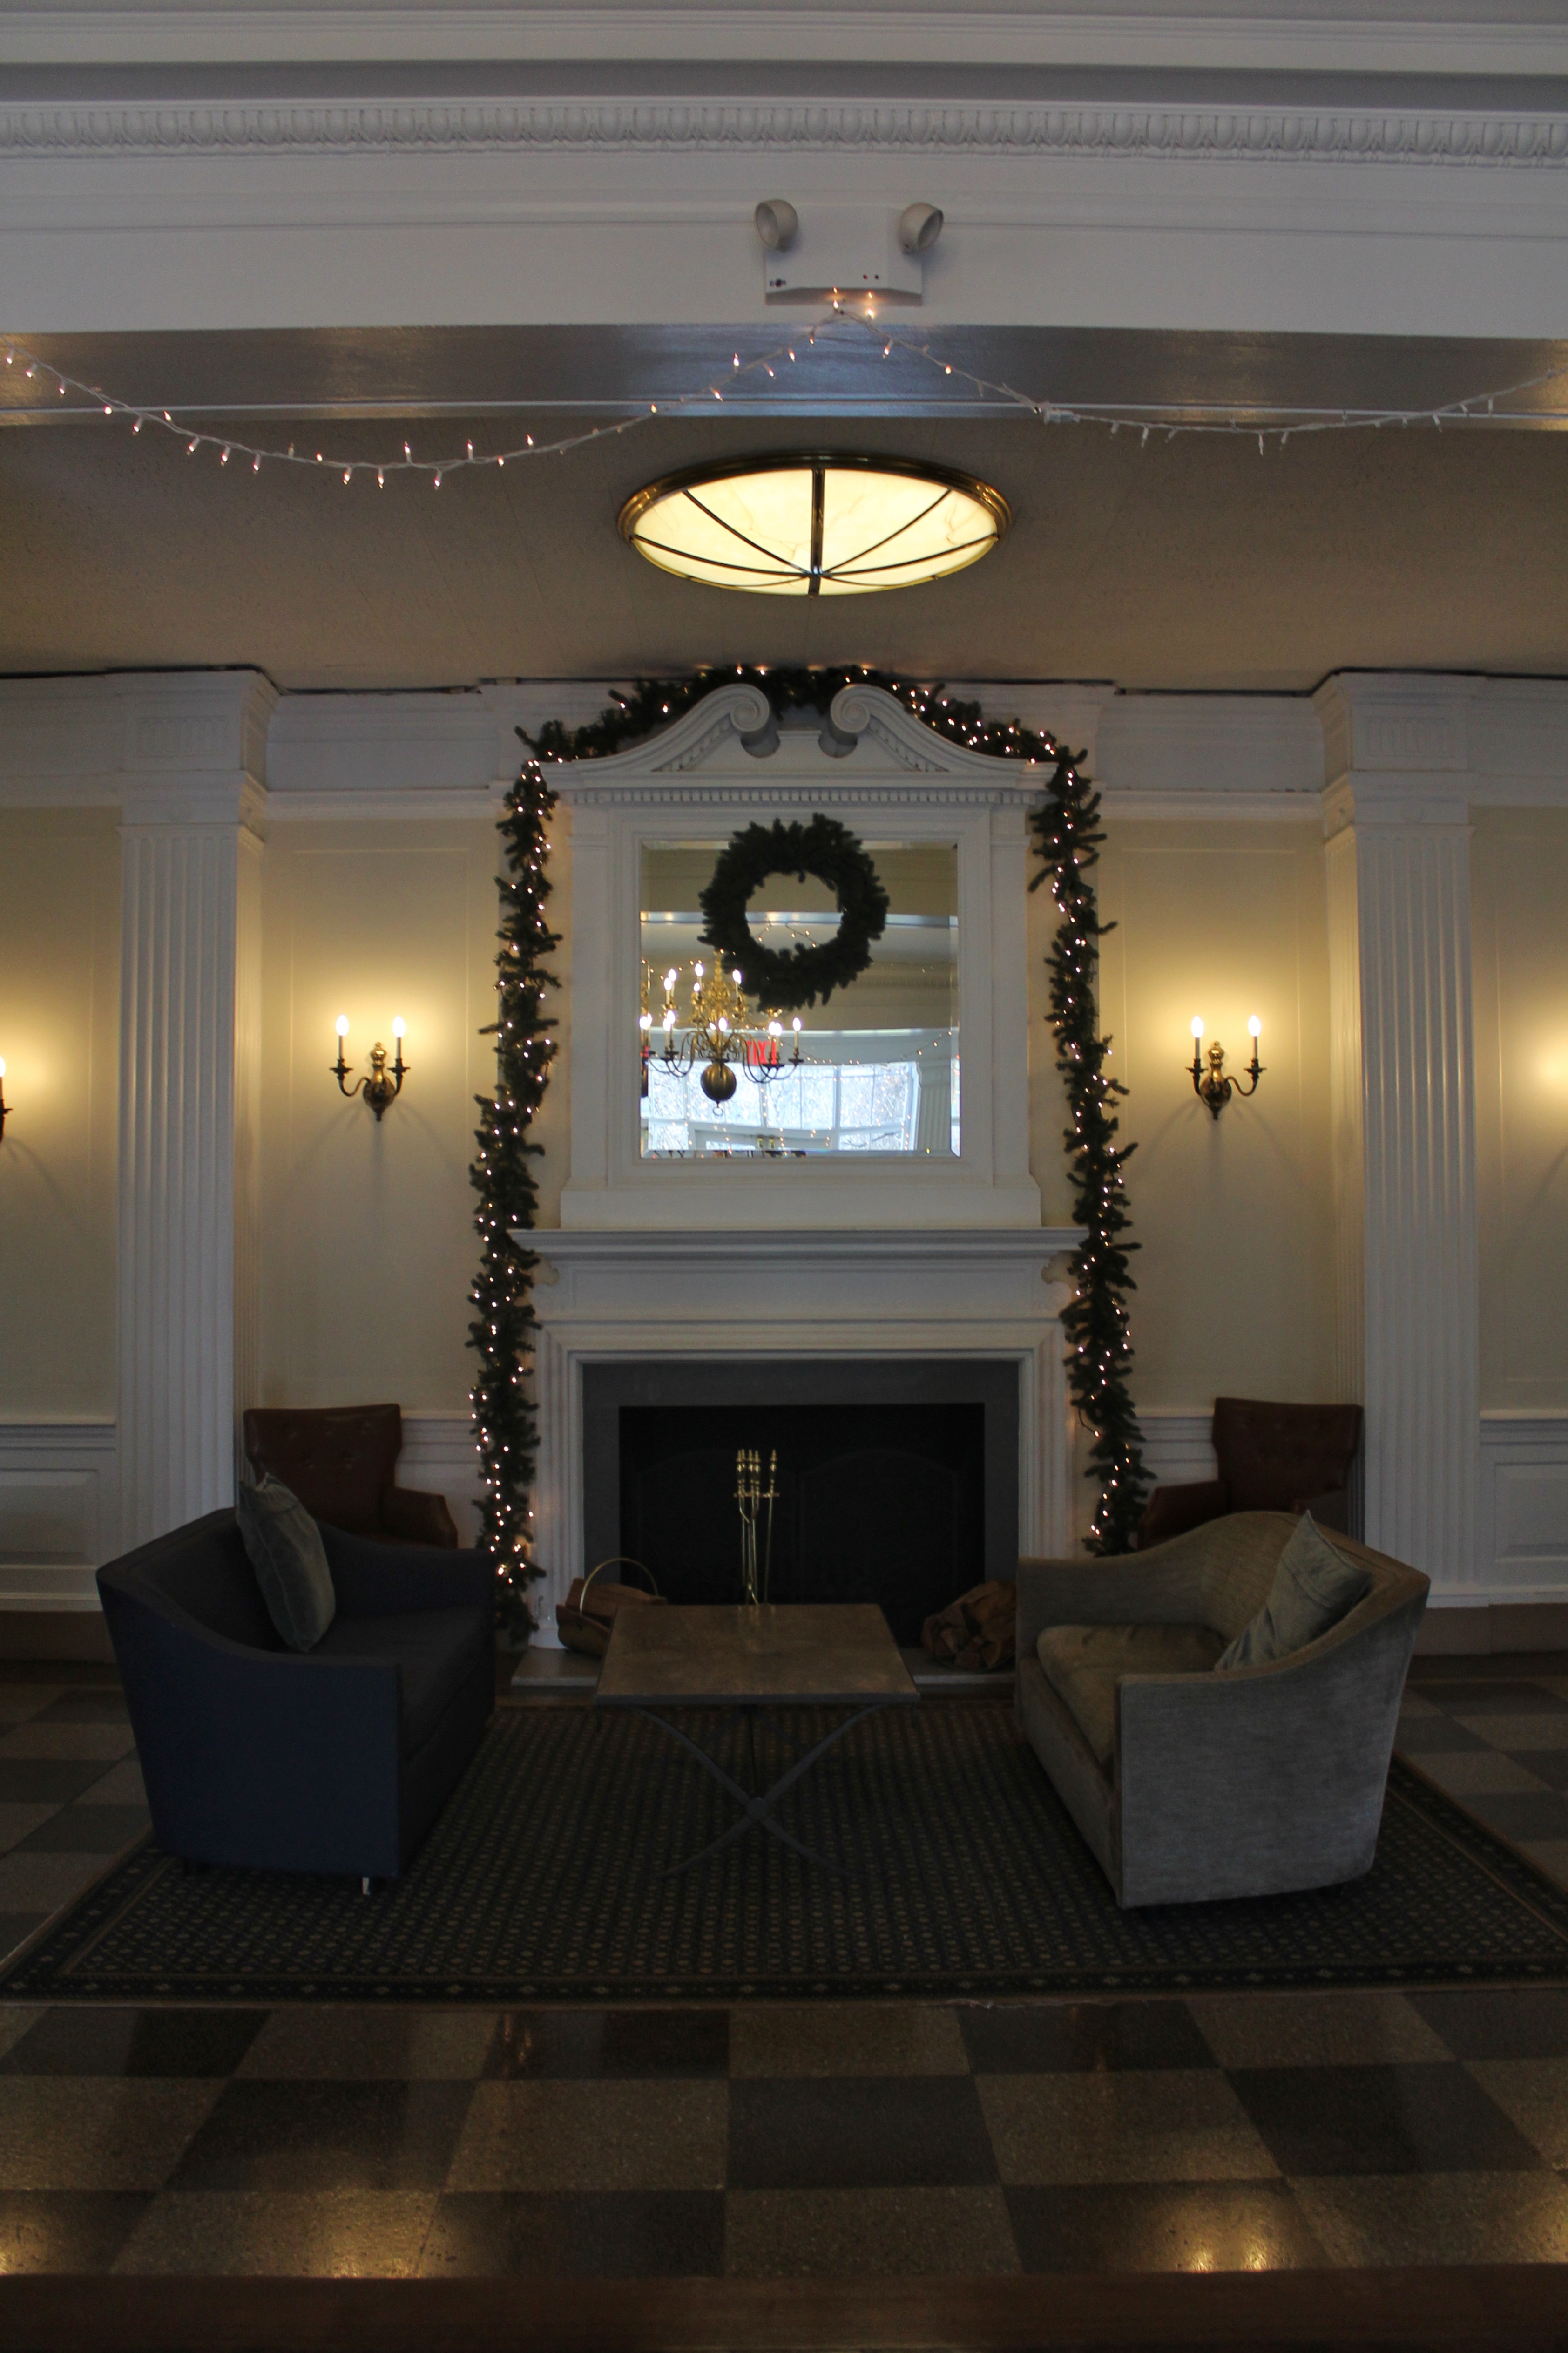 A fireplace with sofas on either side and a wreath adorning the mirror above it. There are Christmas lights on leaves surrounding the mirror.